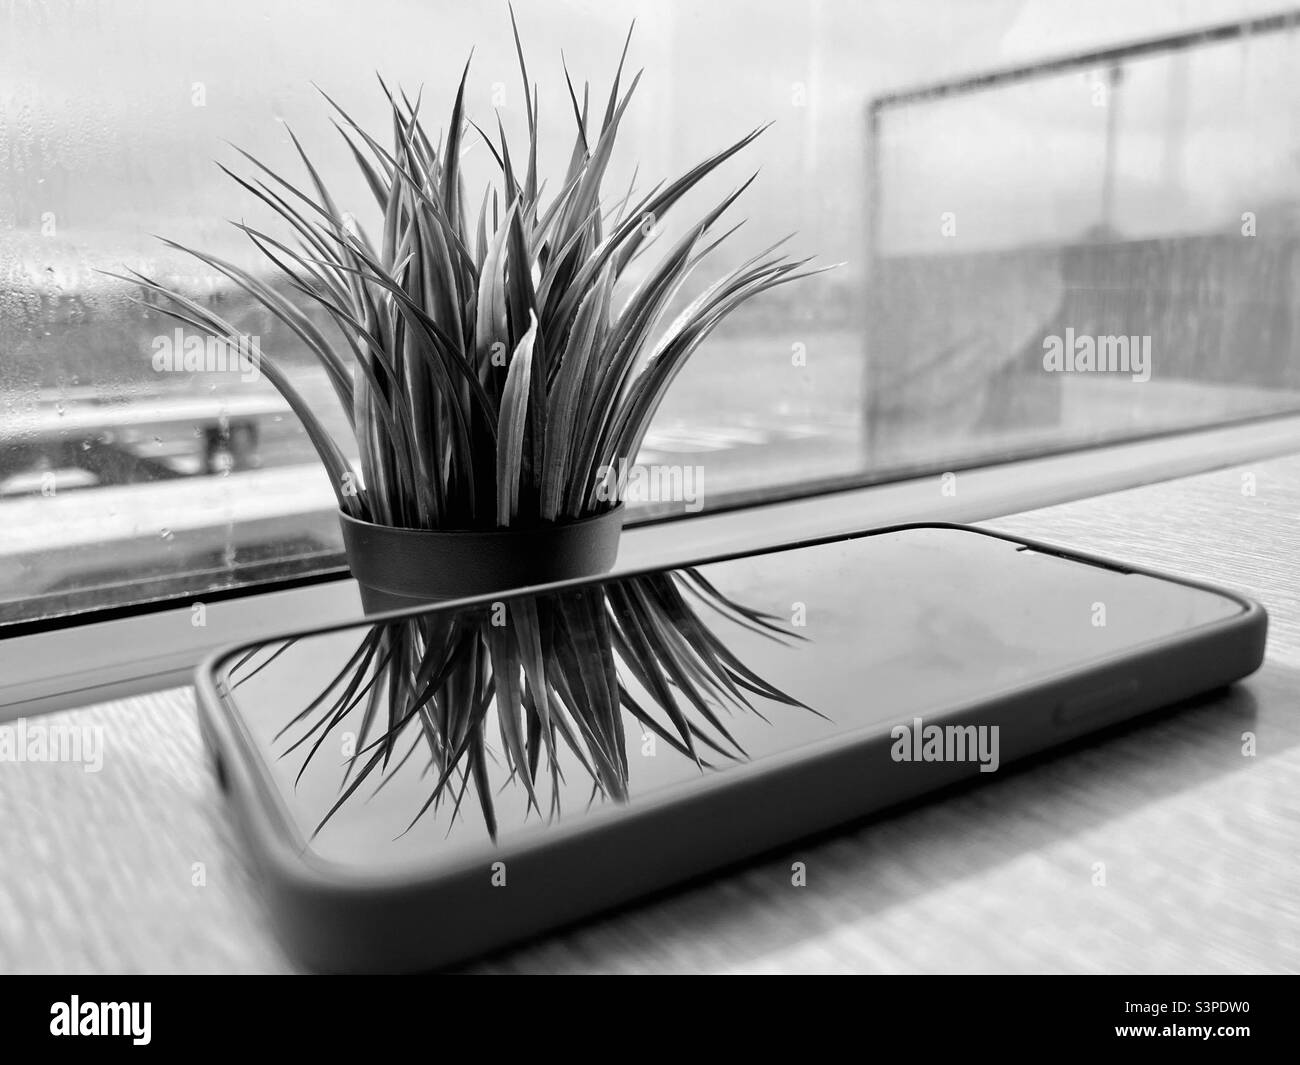 Plant reflection in iPhone screen in black and white Stock Photo